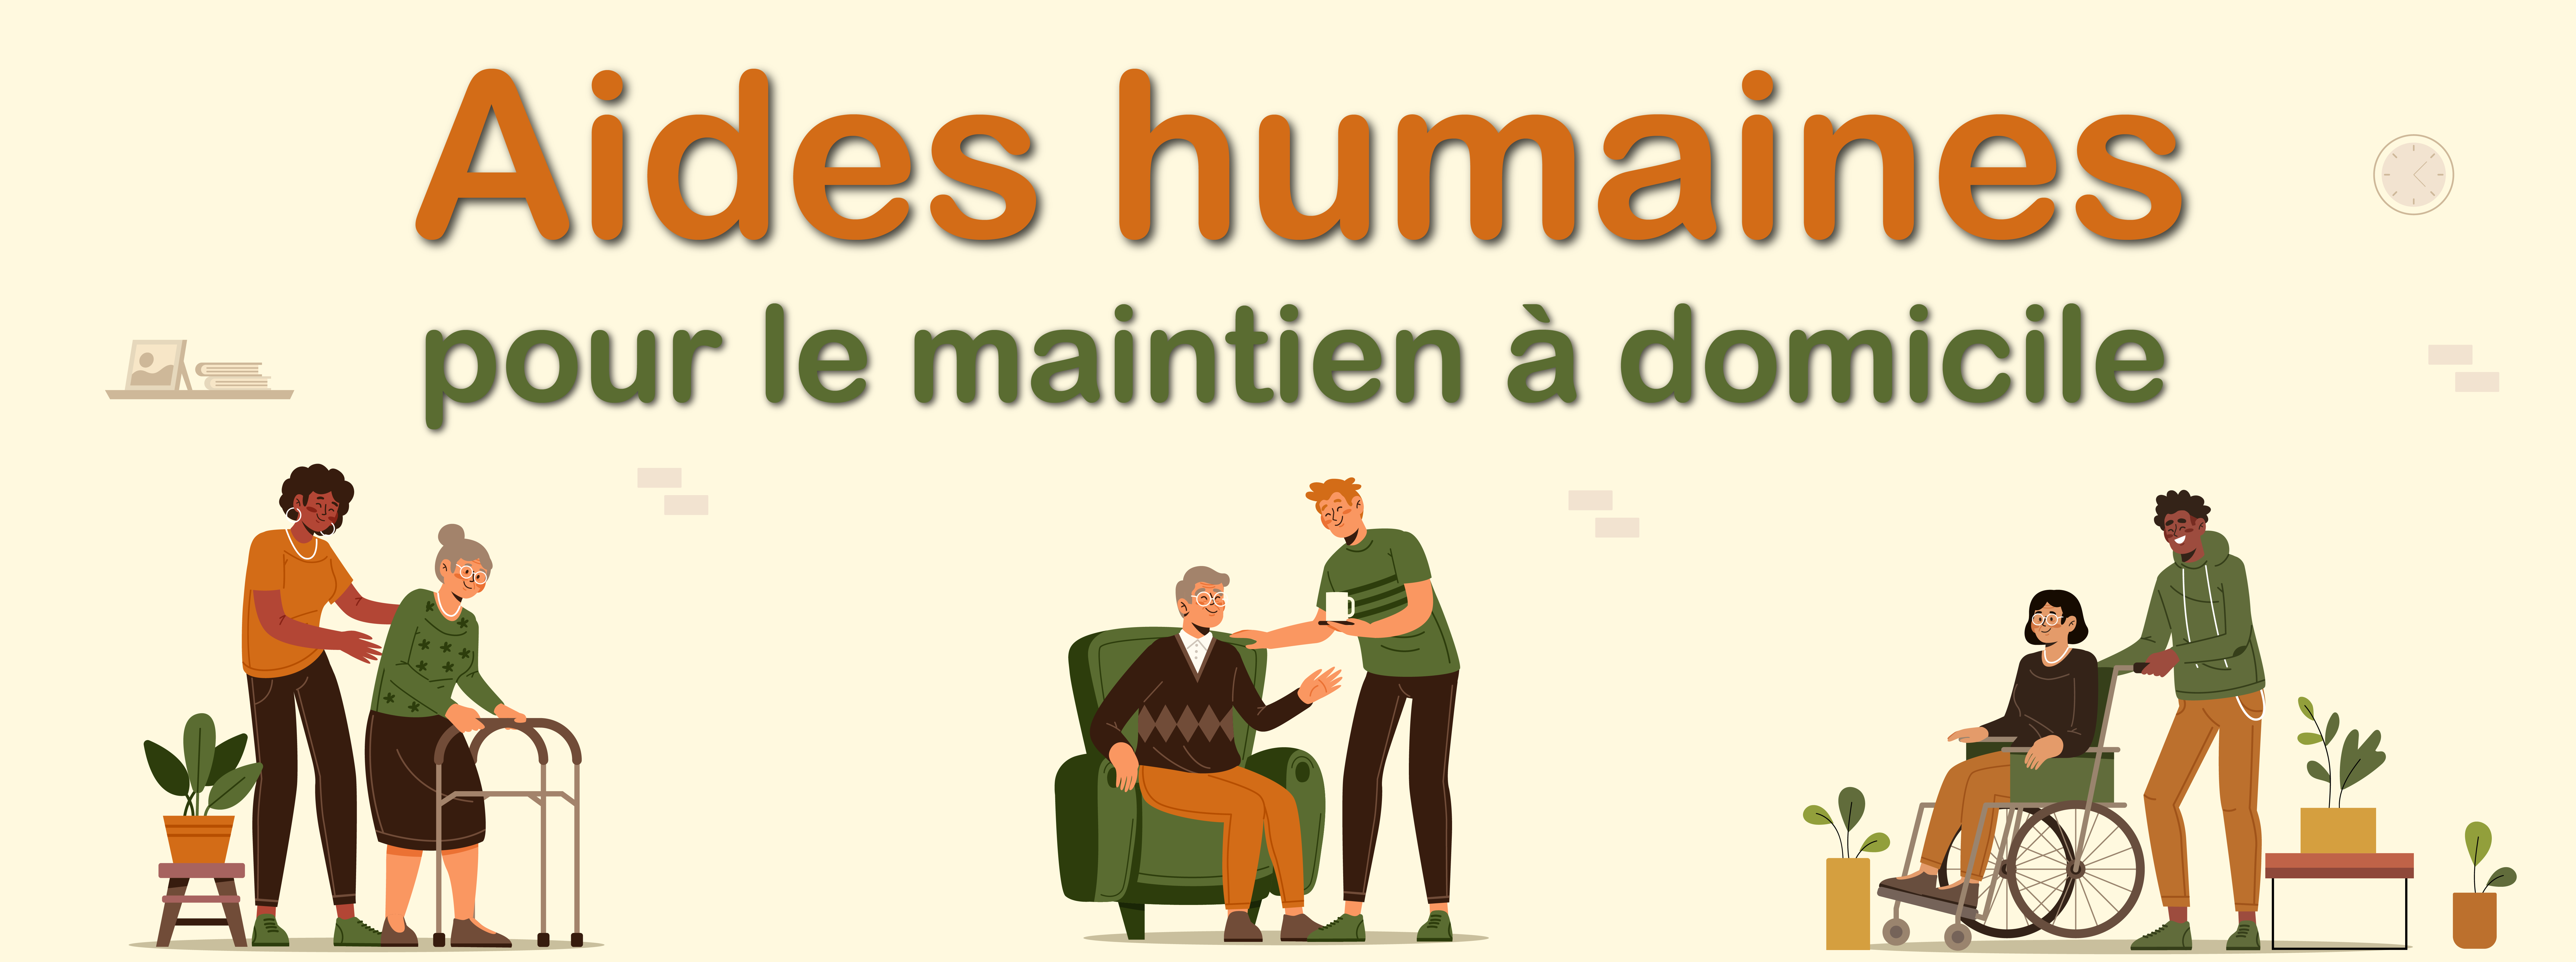 2276x850_aides_humaines-01.png